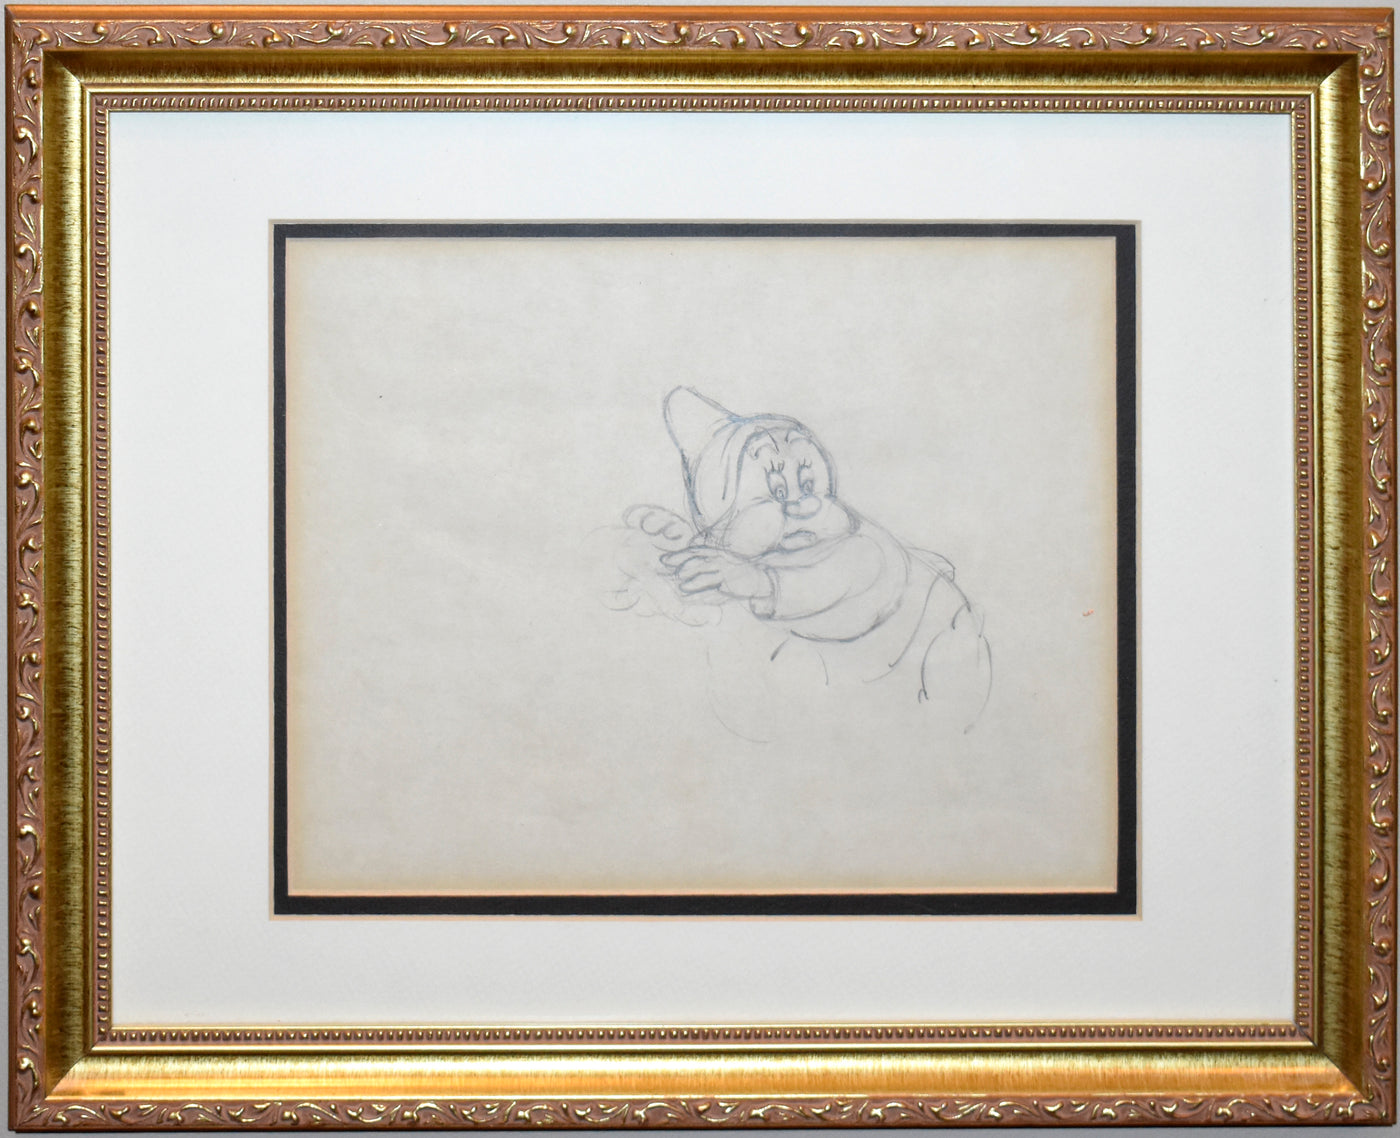 Original Walt Disney Production Drawing from Snow White and the Seven Dwarfs Featuring Happy